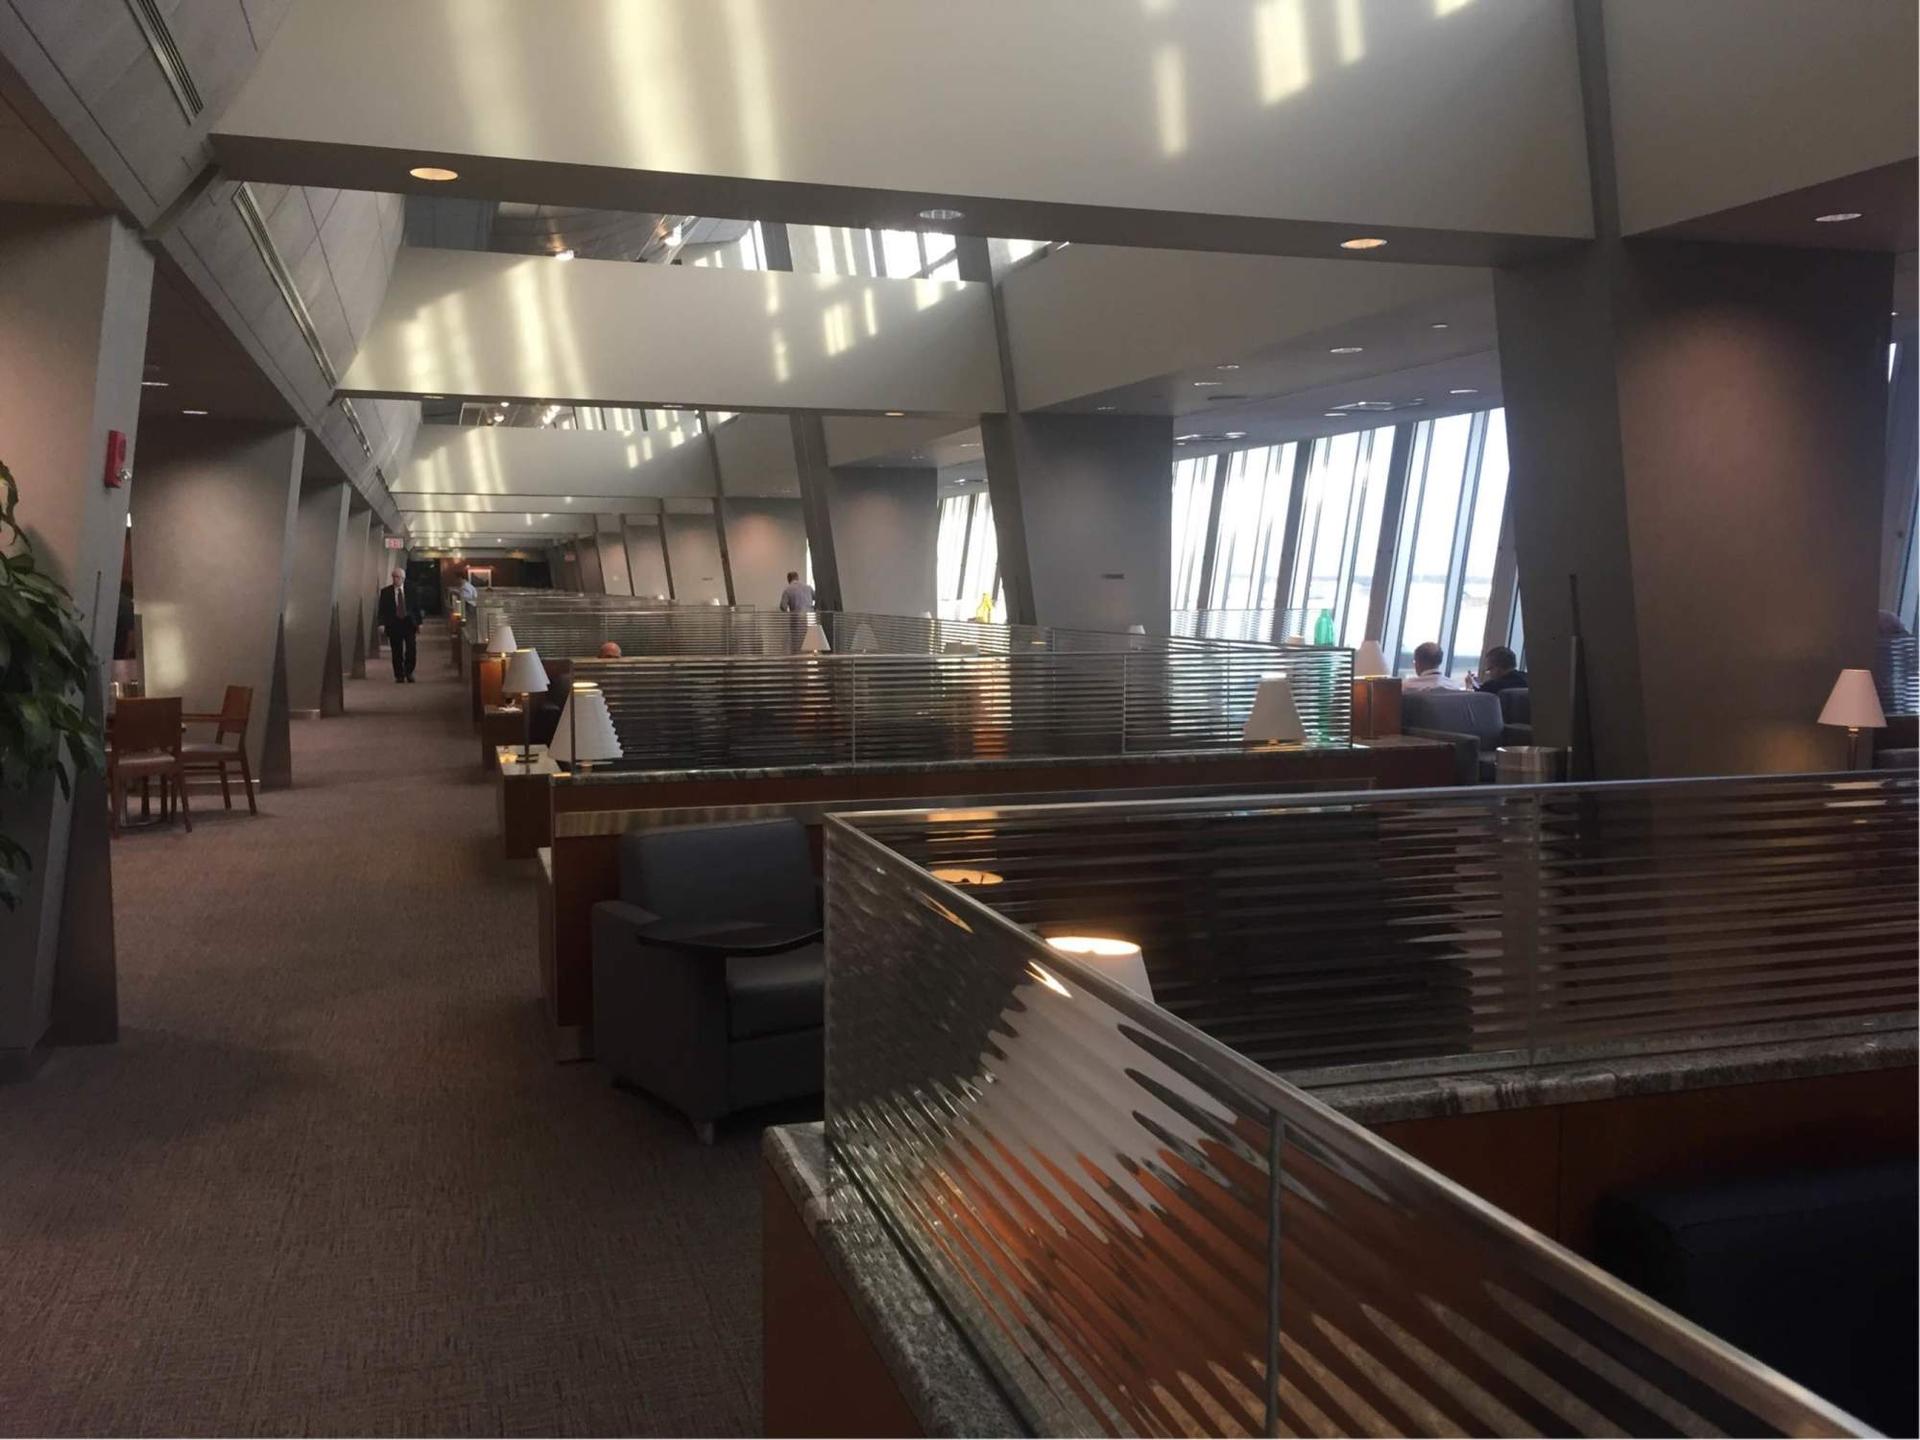 American Airlines Admirals Club image 13 of 48